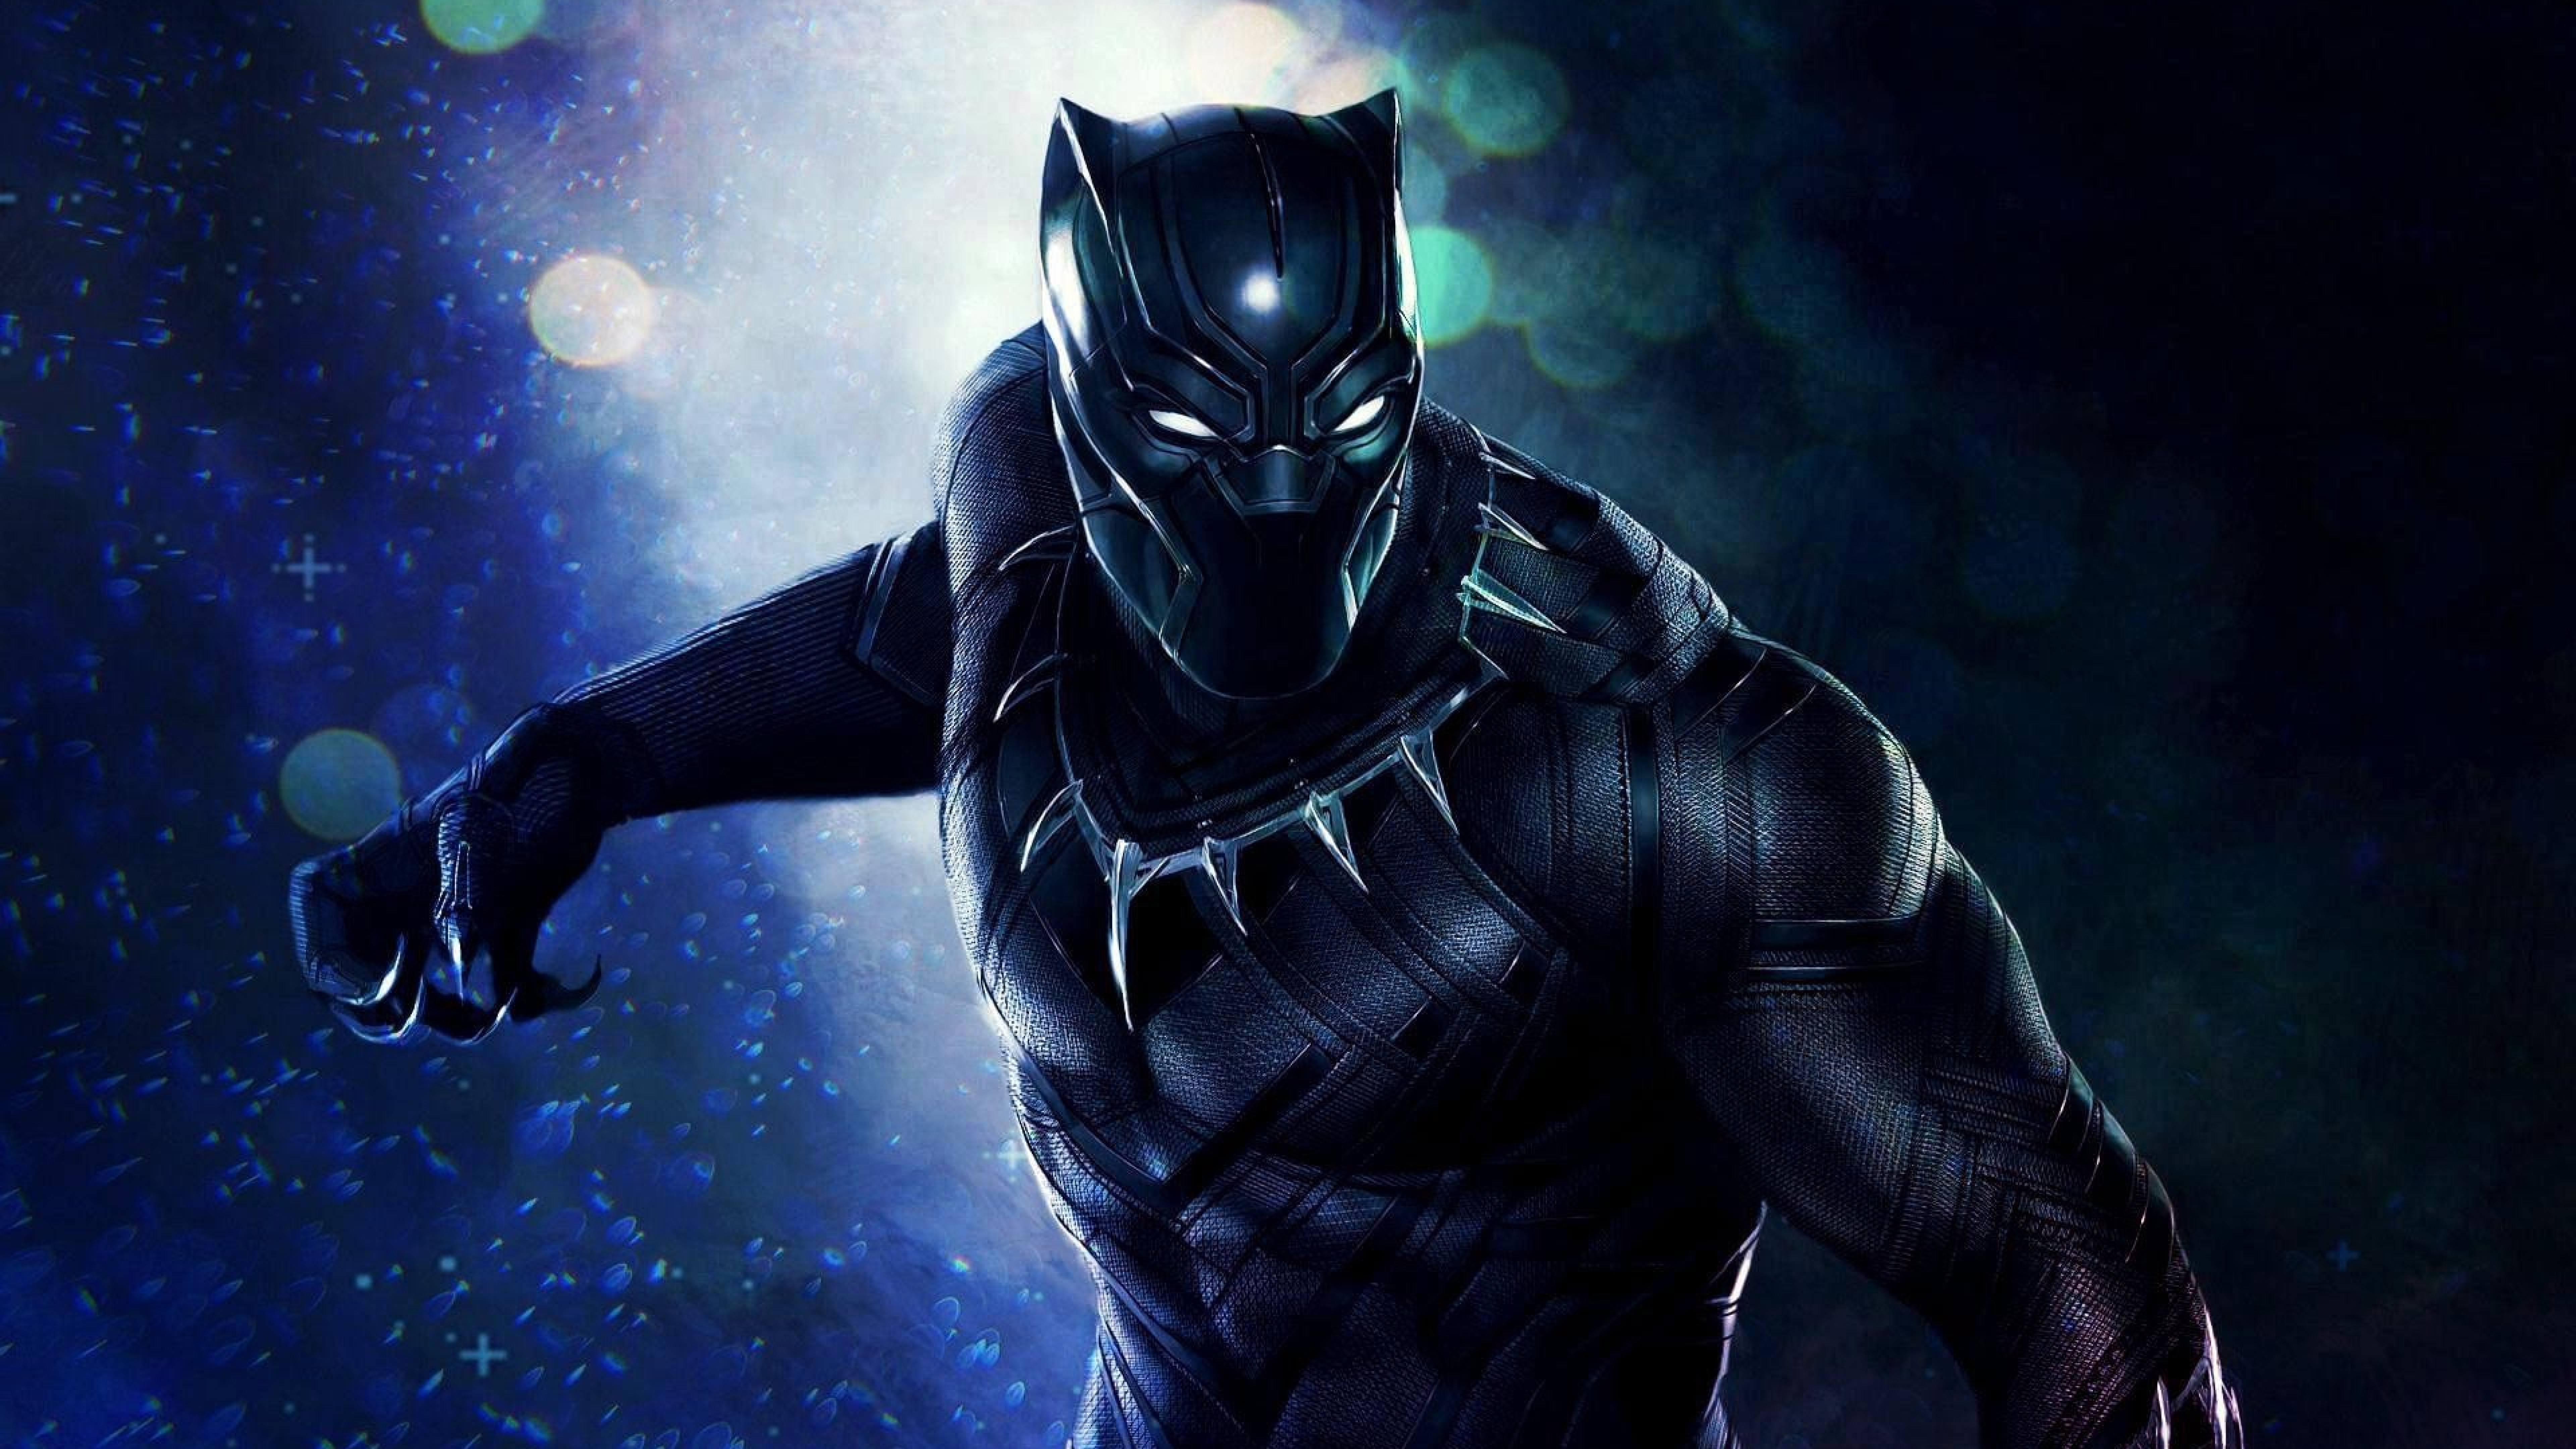 7680x4320 Black Panther 8k 8k HD 4k Wallpapers, Images, Backgrounds